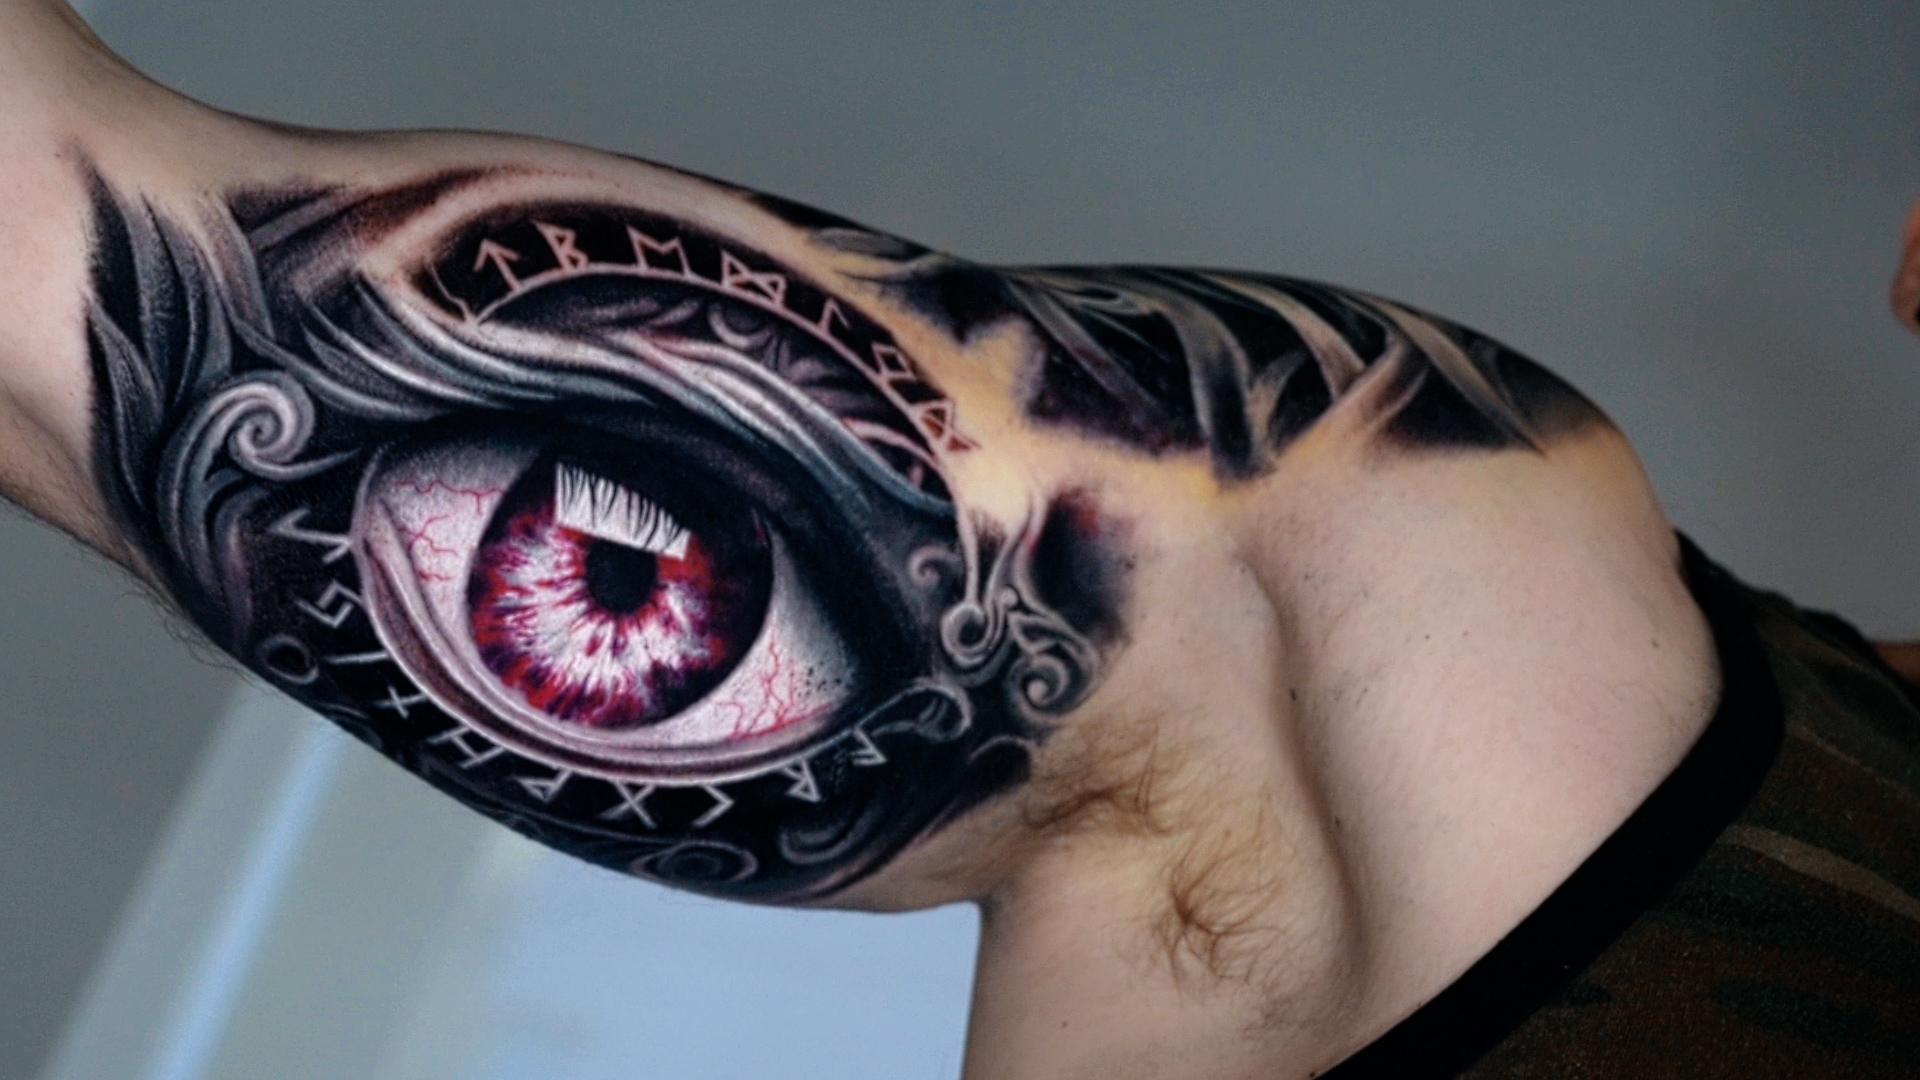 Cool Eye Tattoo Ideas for Your Next Ink - tattoos near me